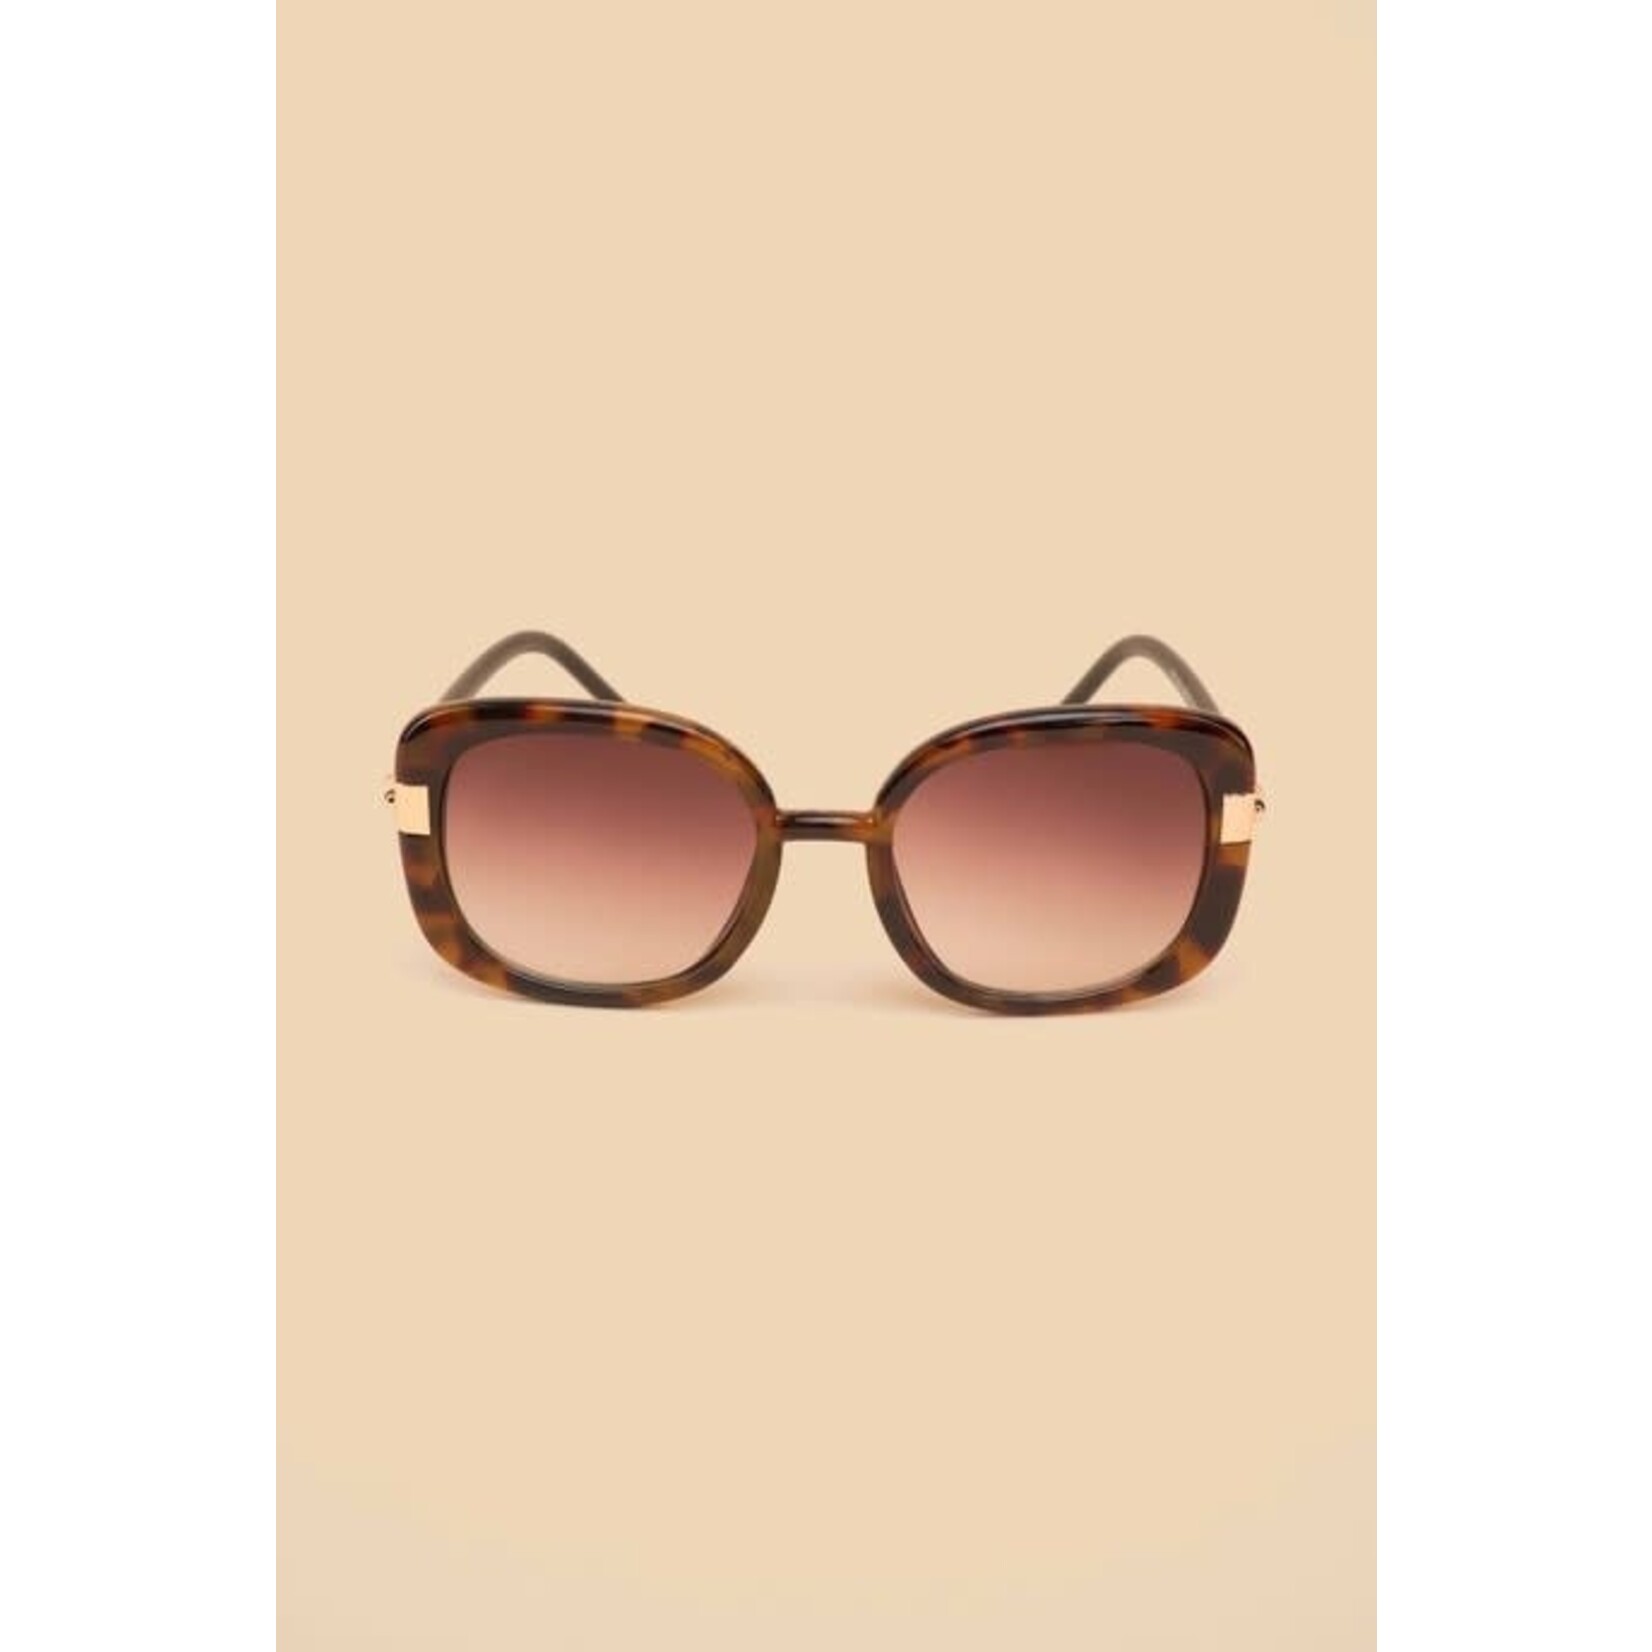 Powder Paige Limited Edition Sunglasses in Mahogany